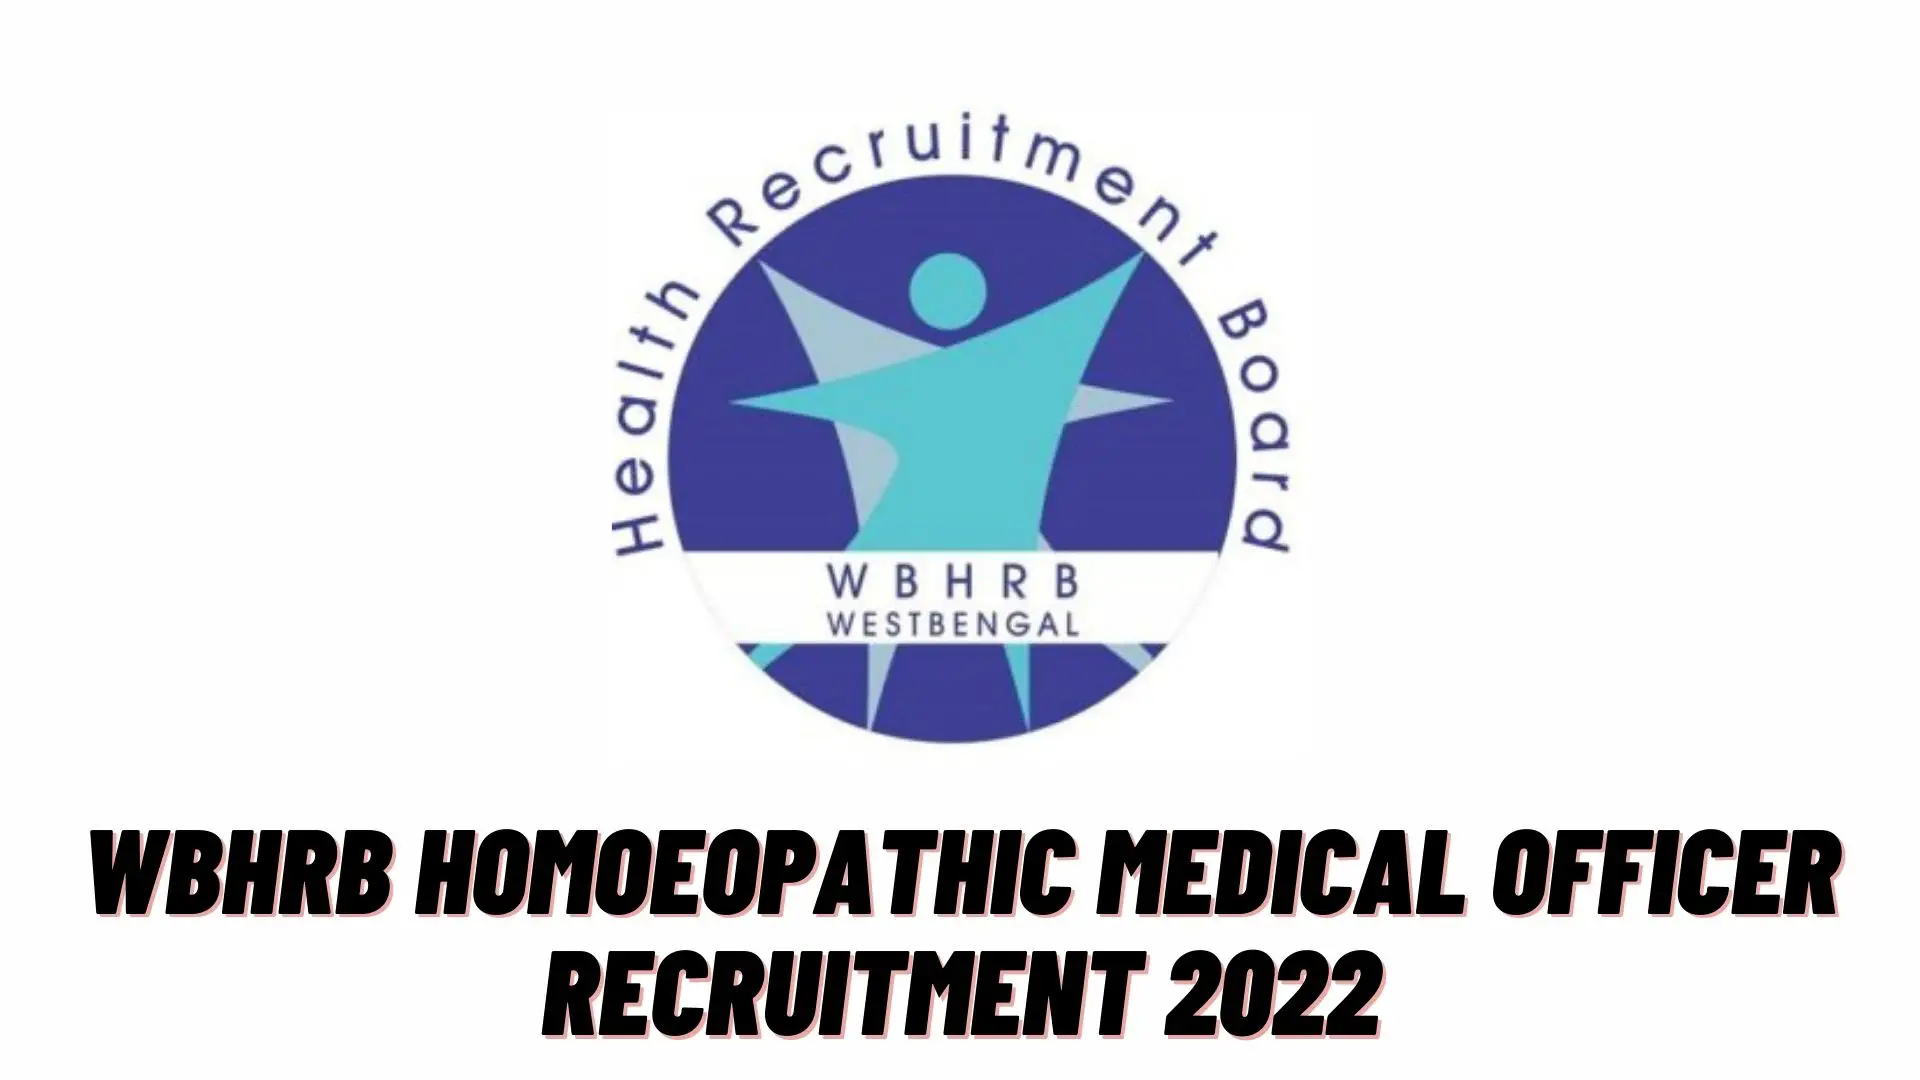 WBHRB Homoeopathic Medical Officer Recruitment 2022